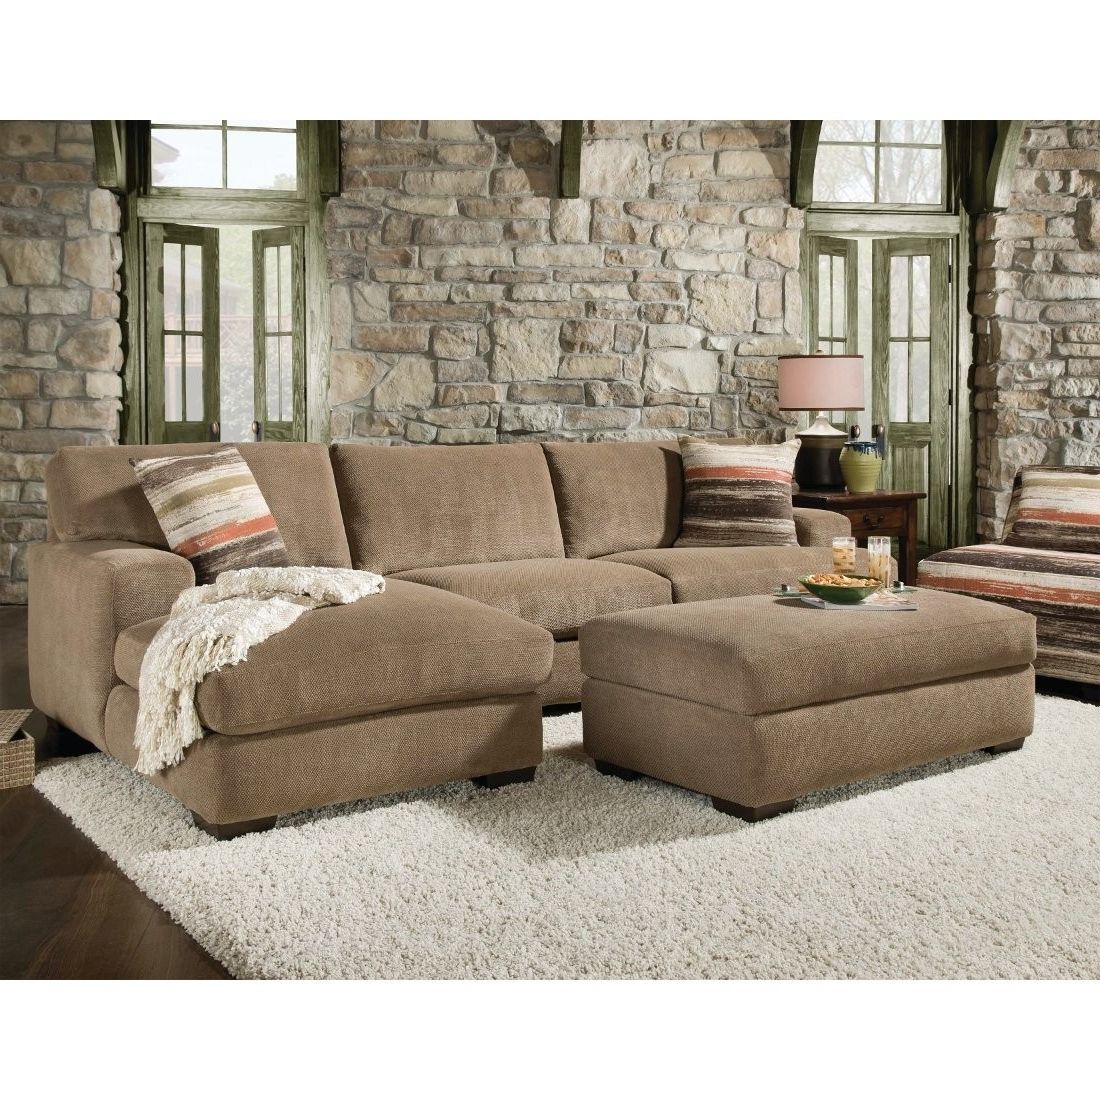 Leather Sectionals With Chaise And Ottoman With Regard To Famous Beautiful Sectional Sofa With Chaise And Ottoman Pictures (View 1 of 15)